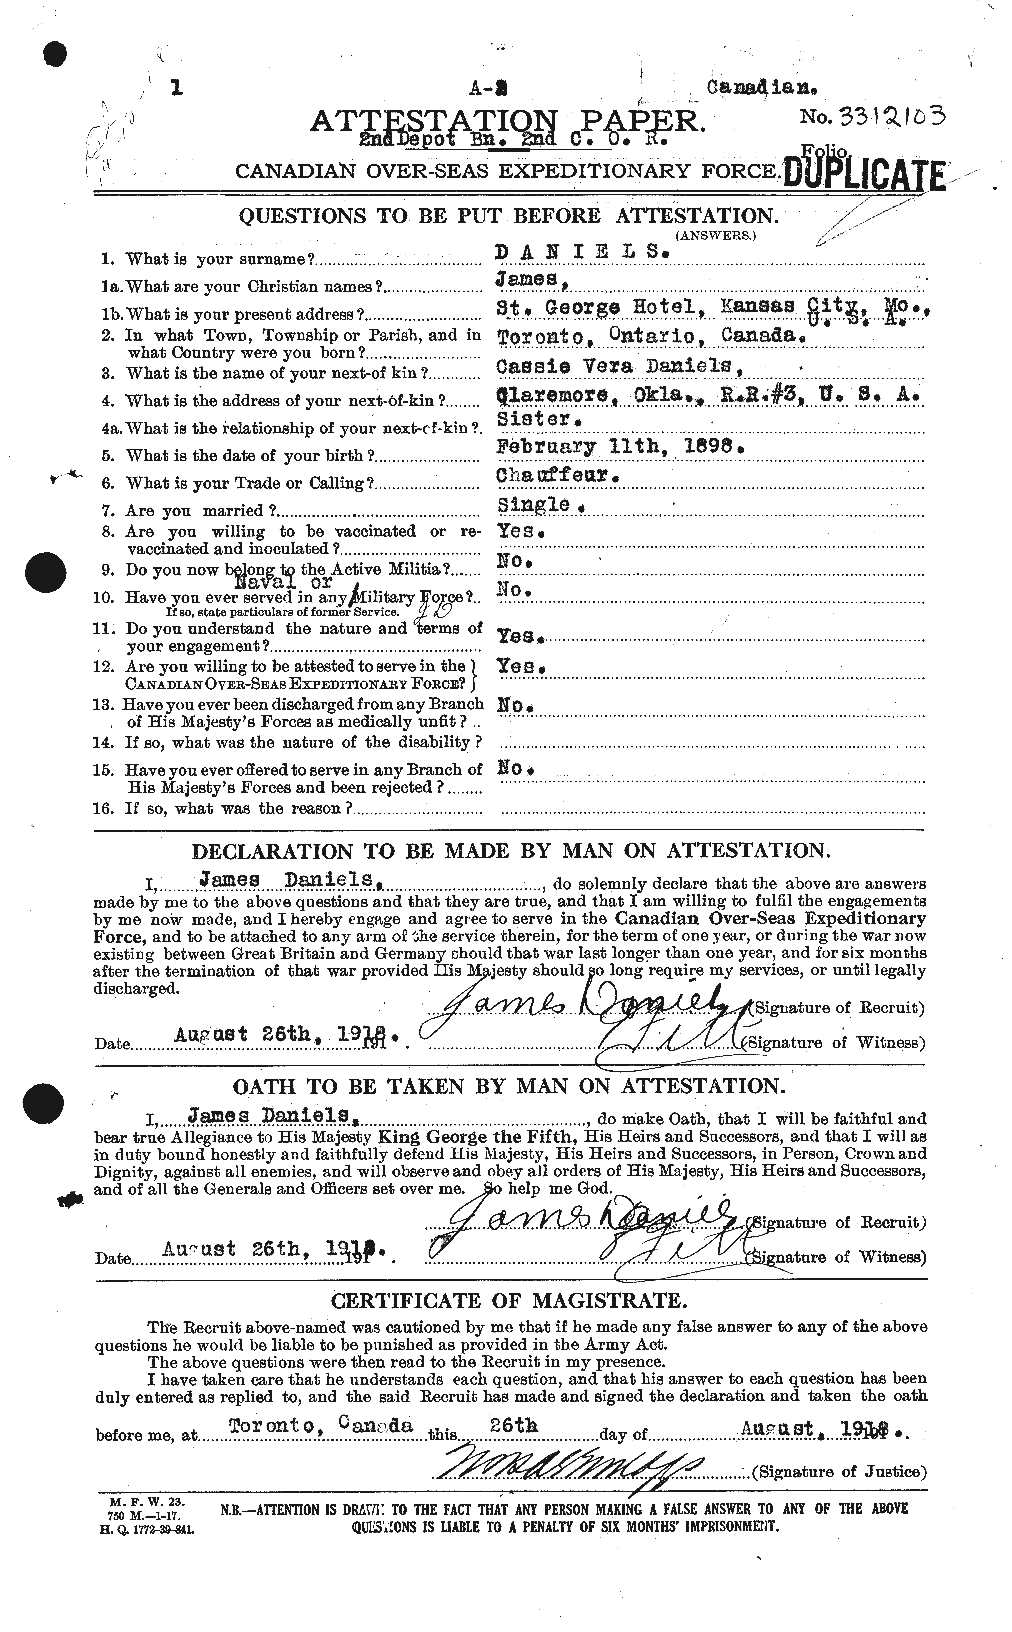 Personnel Records of the First World War - CEF 279630a